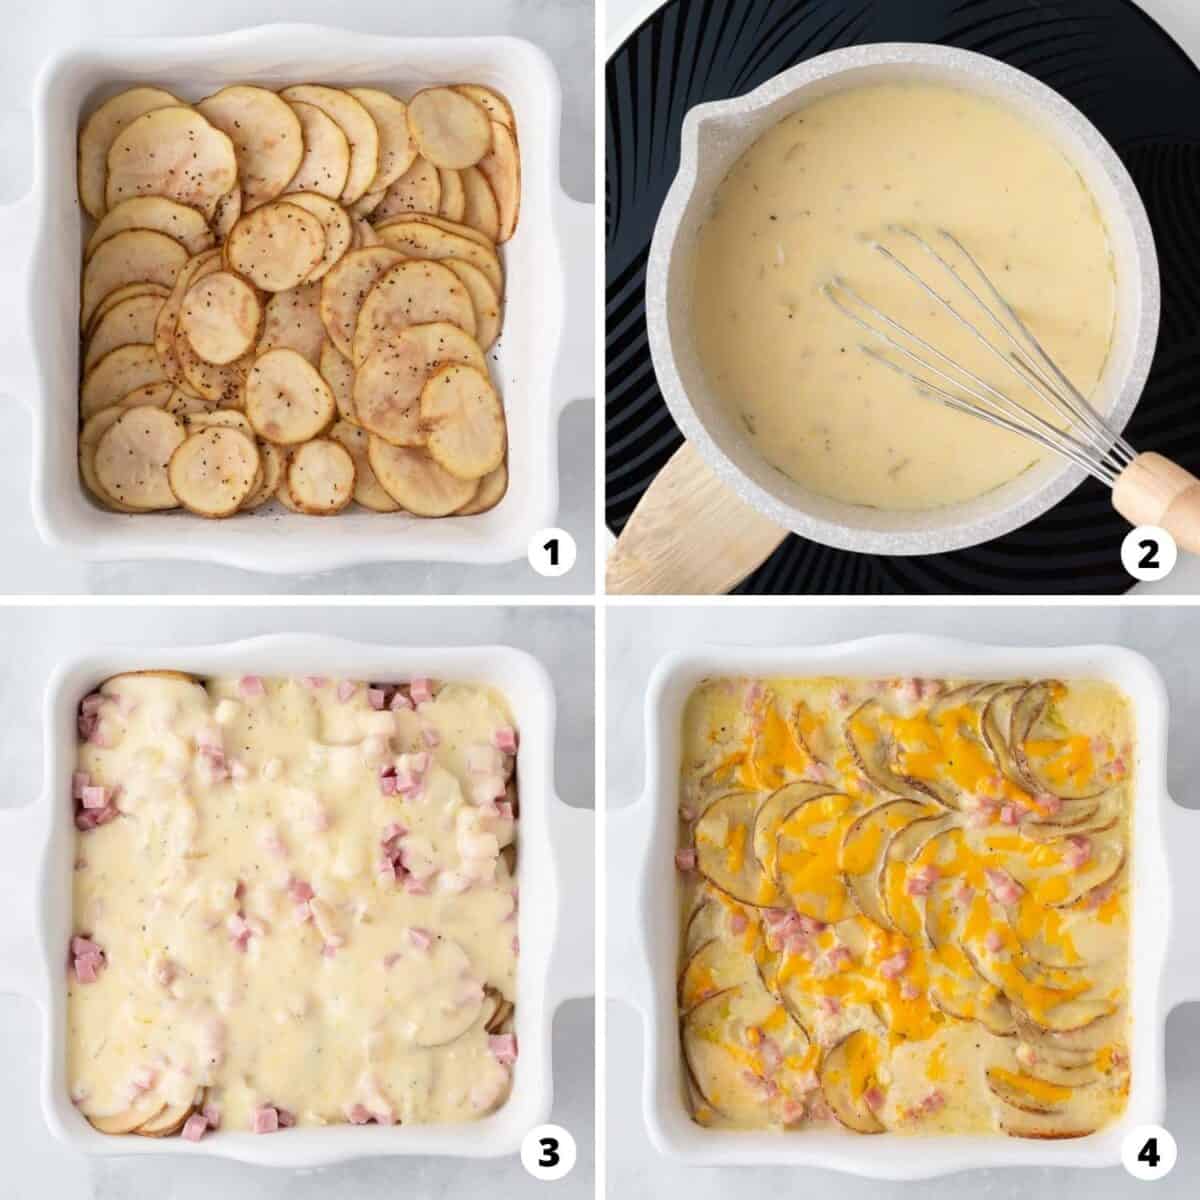 Showing how to make scalloped potatoes and ham in a 4 step collage.